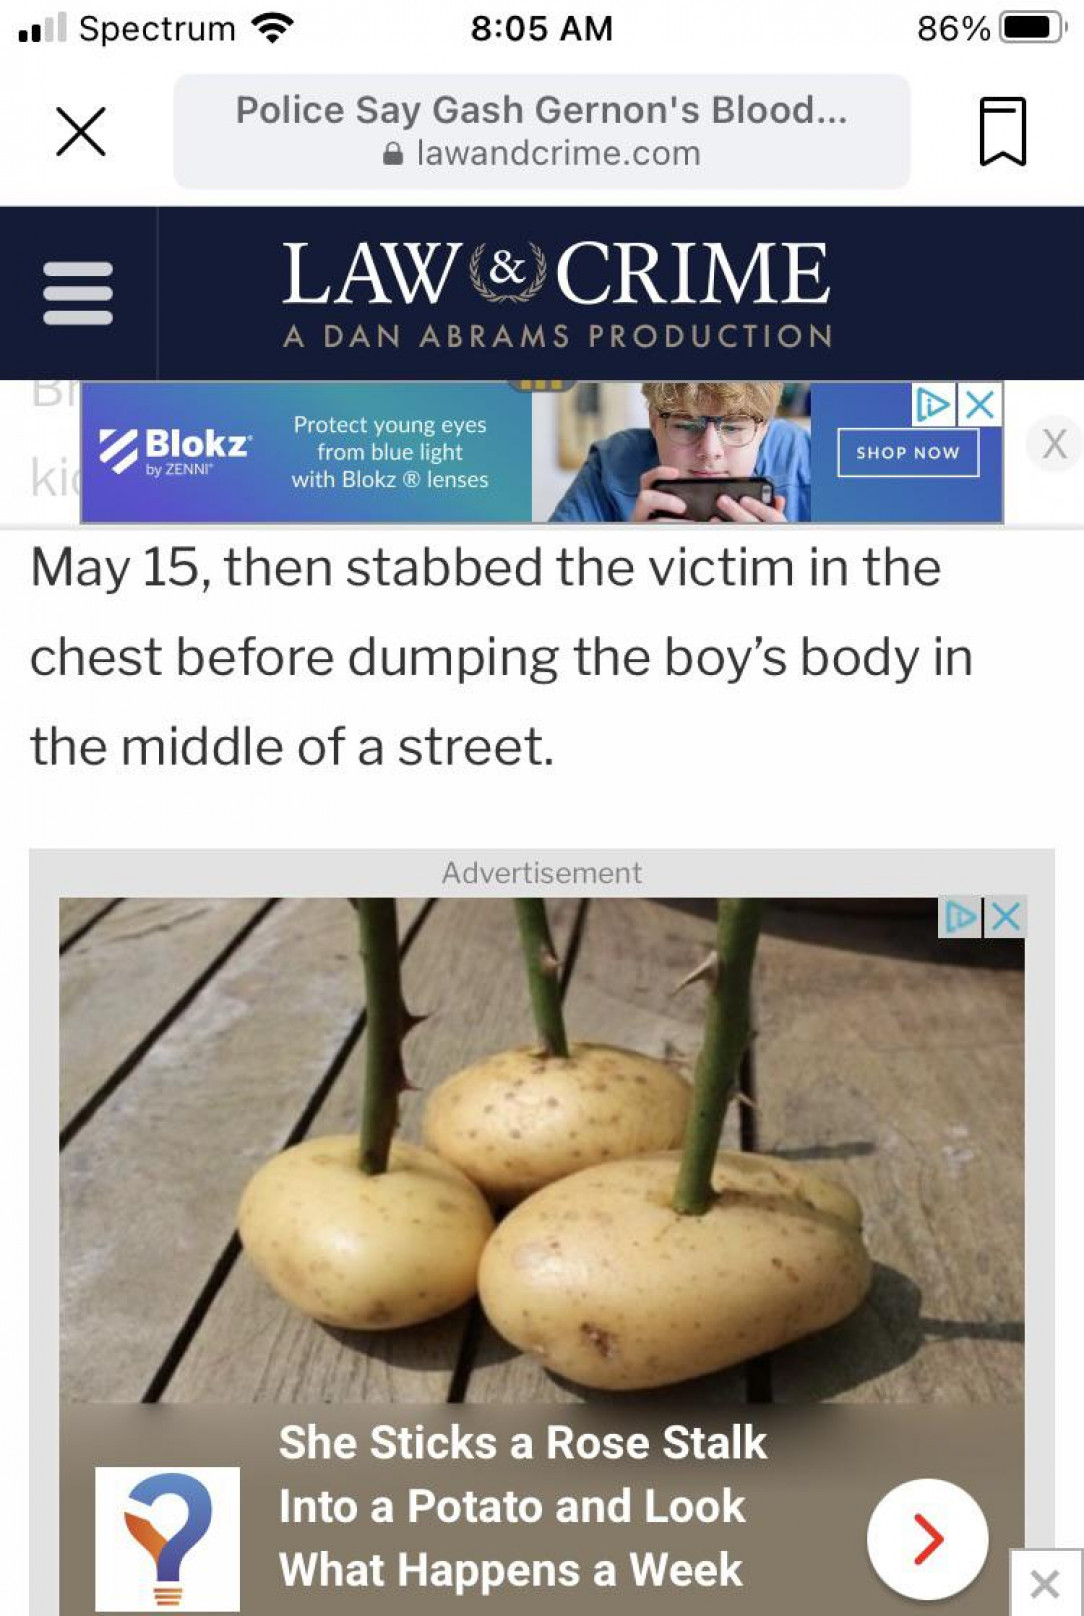 A news item and stabbing a potato